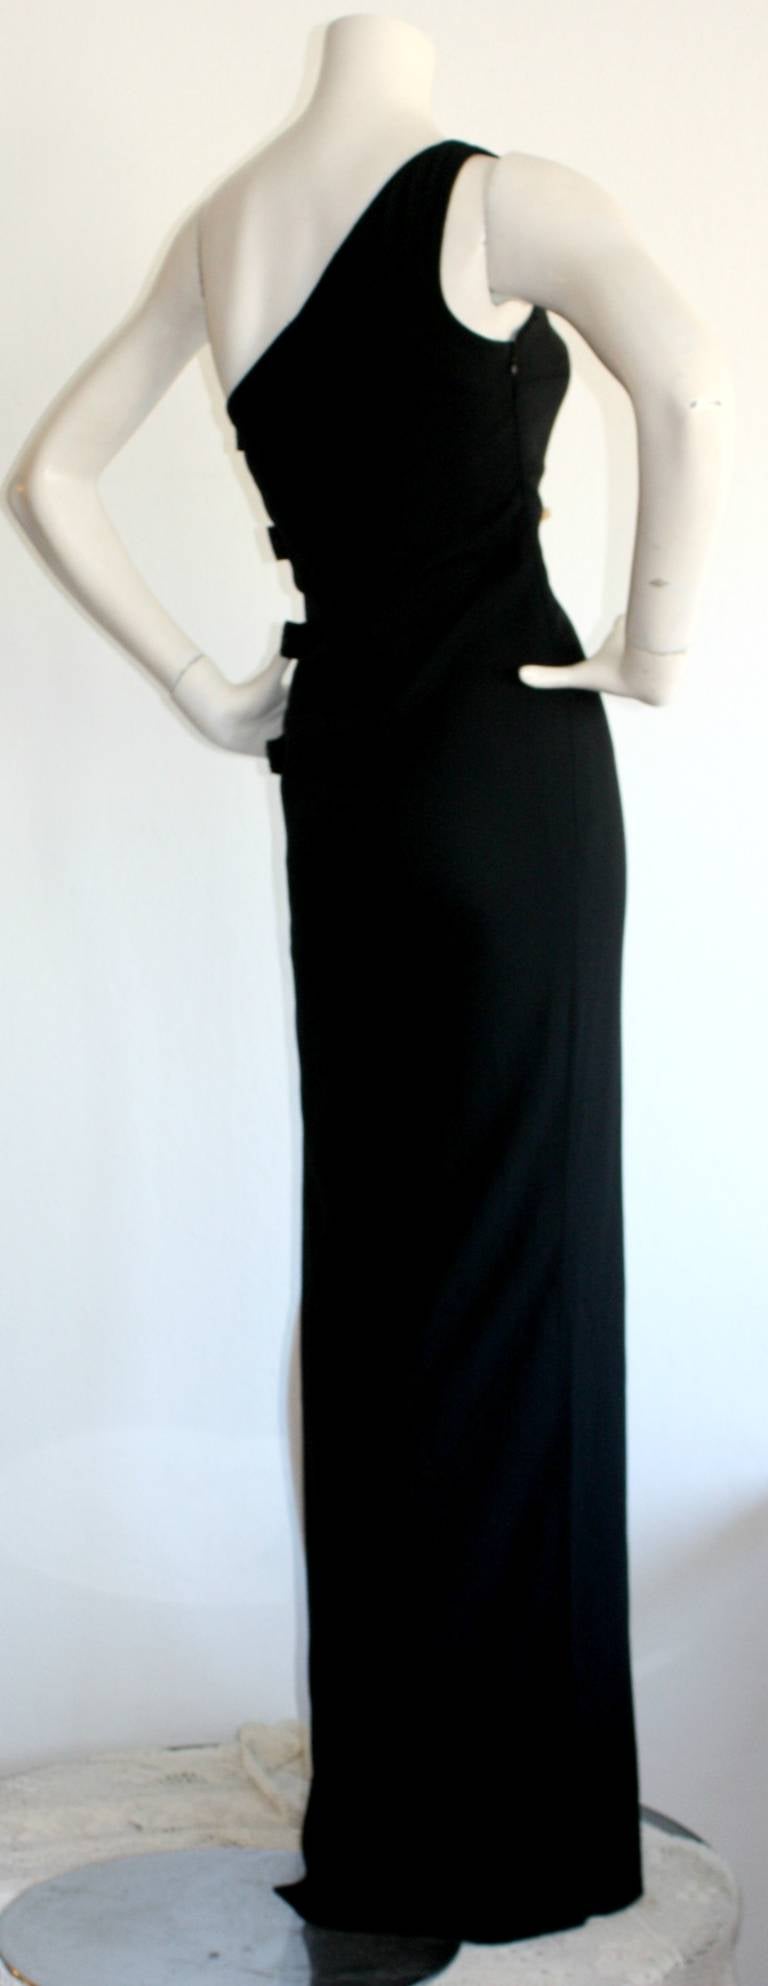 Sexy Galliano Christian Dior Black One Shoulder Gown 2